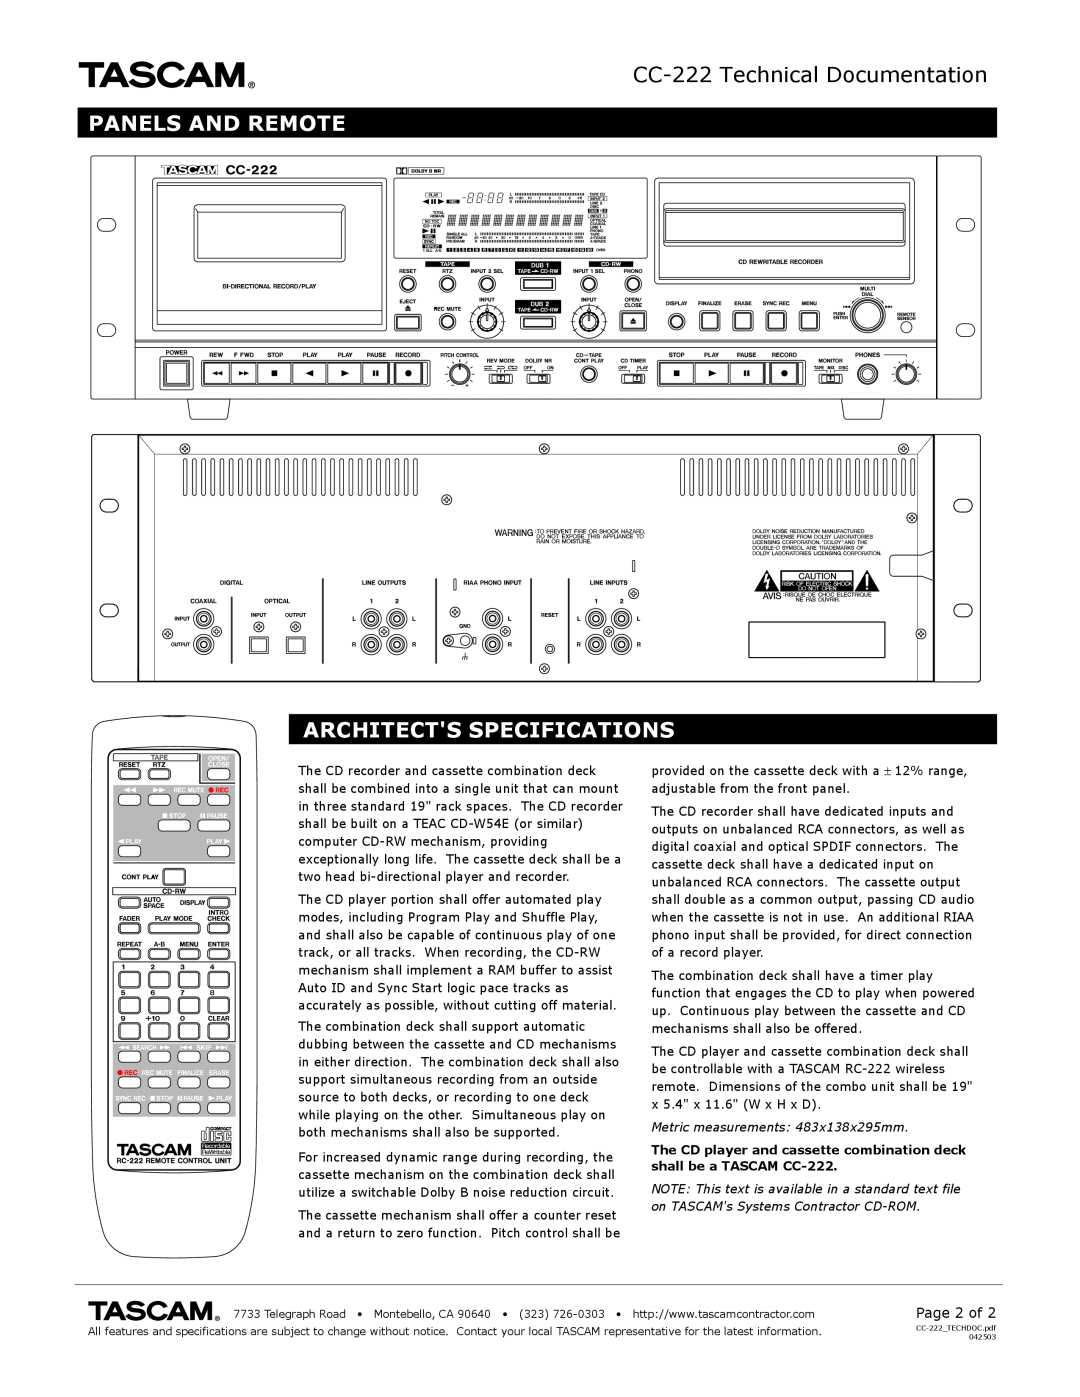 Tascam specifications CC-222Technical Documentation, Panels And Remote Architects Specifications, Page 2 of 